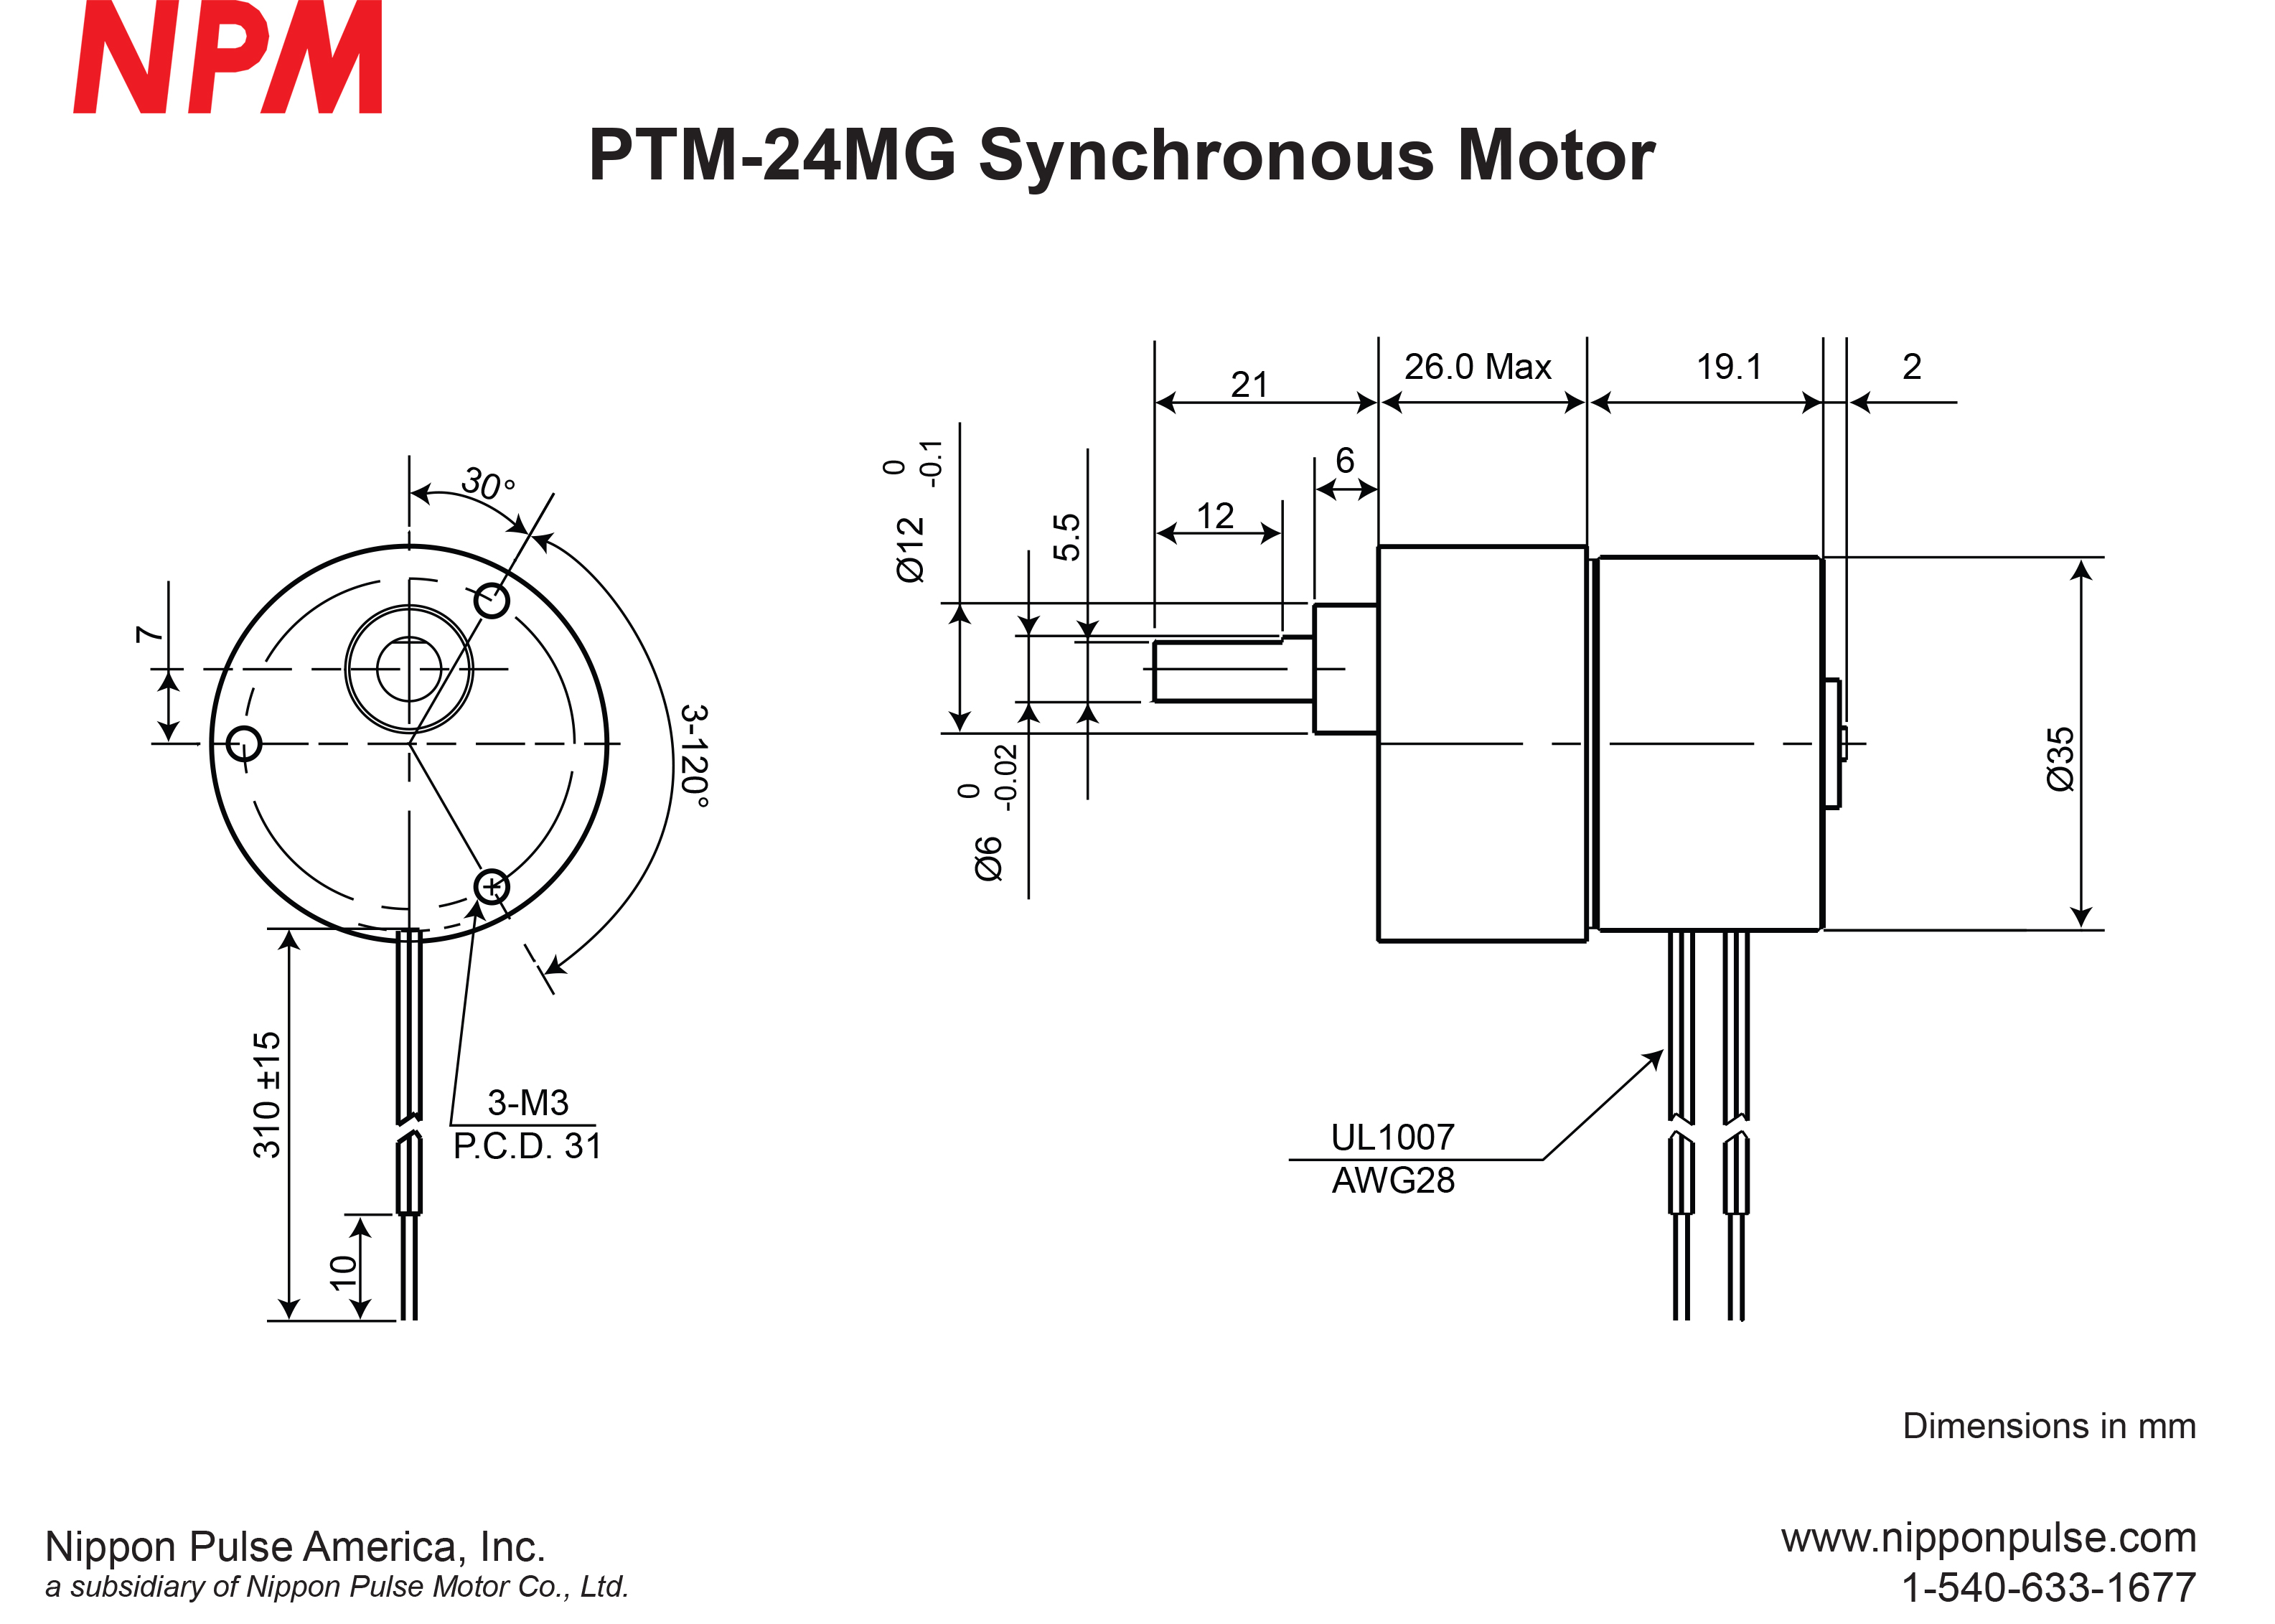 PTM-24MG(1/30) system drawing